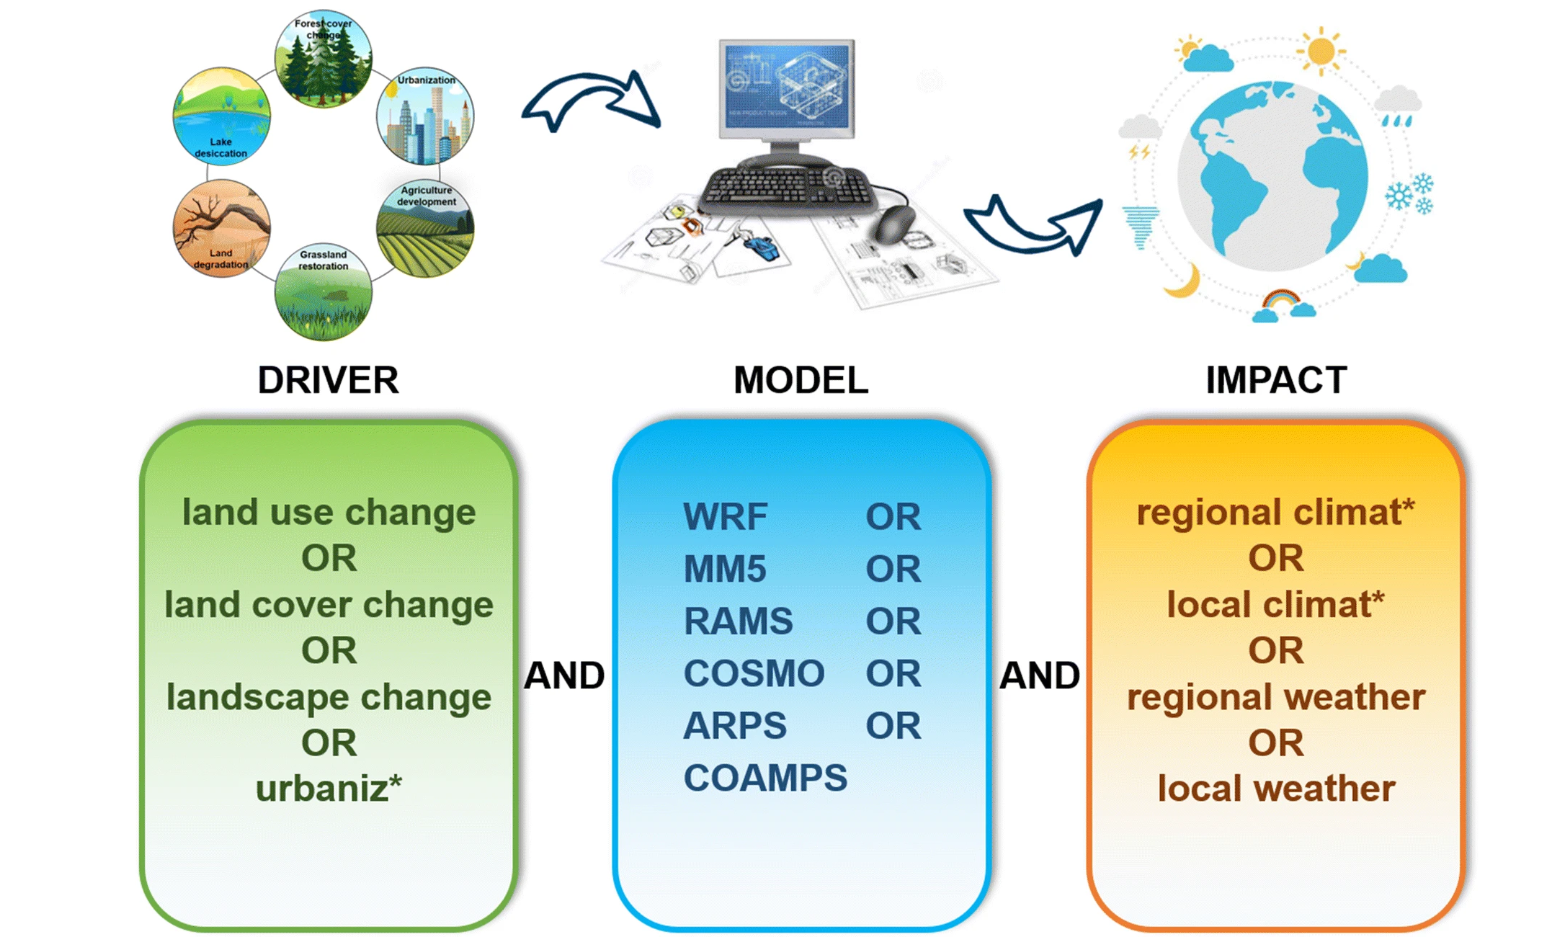 Impacts of landscape changes on local and regional climate:a systematic review